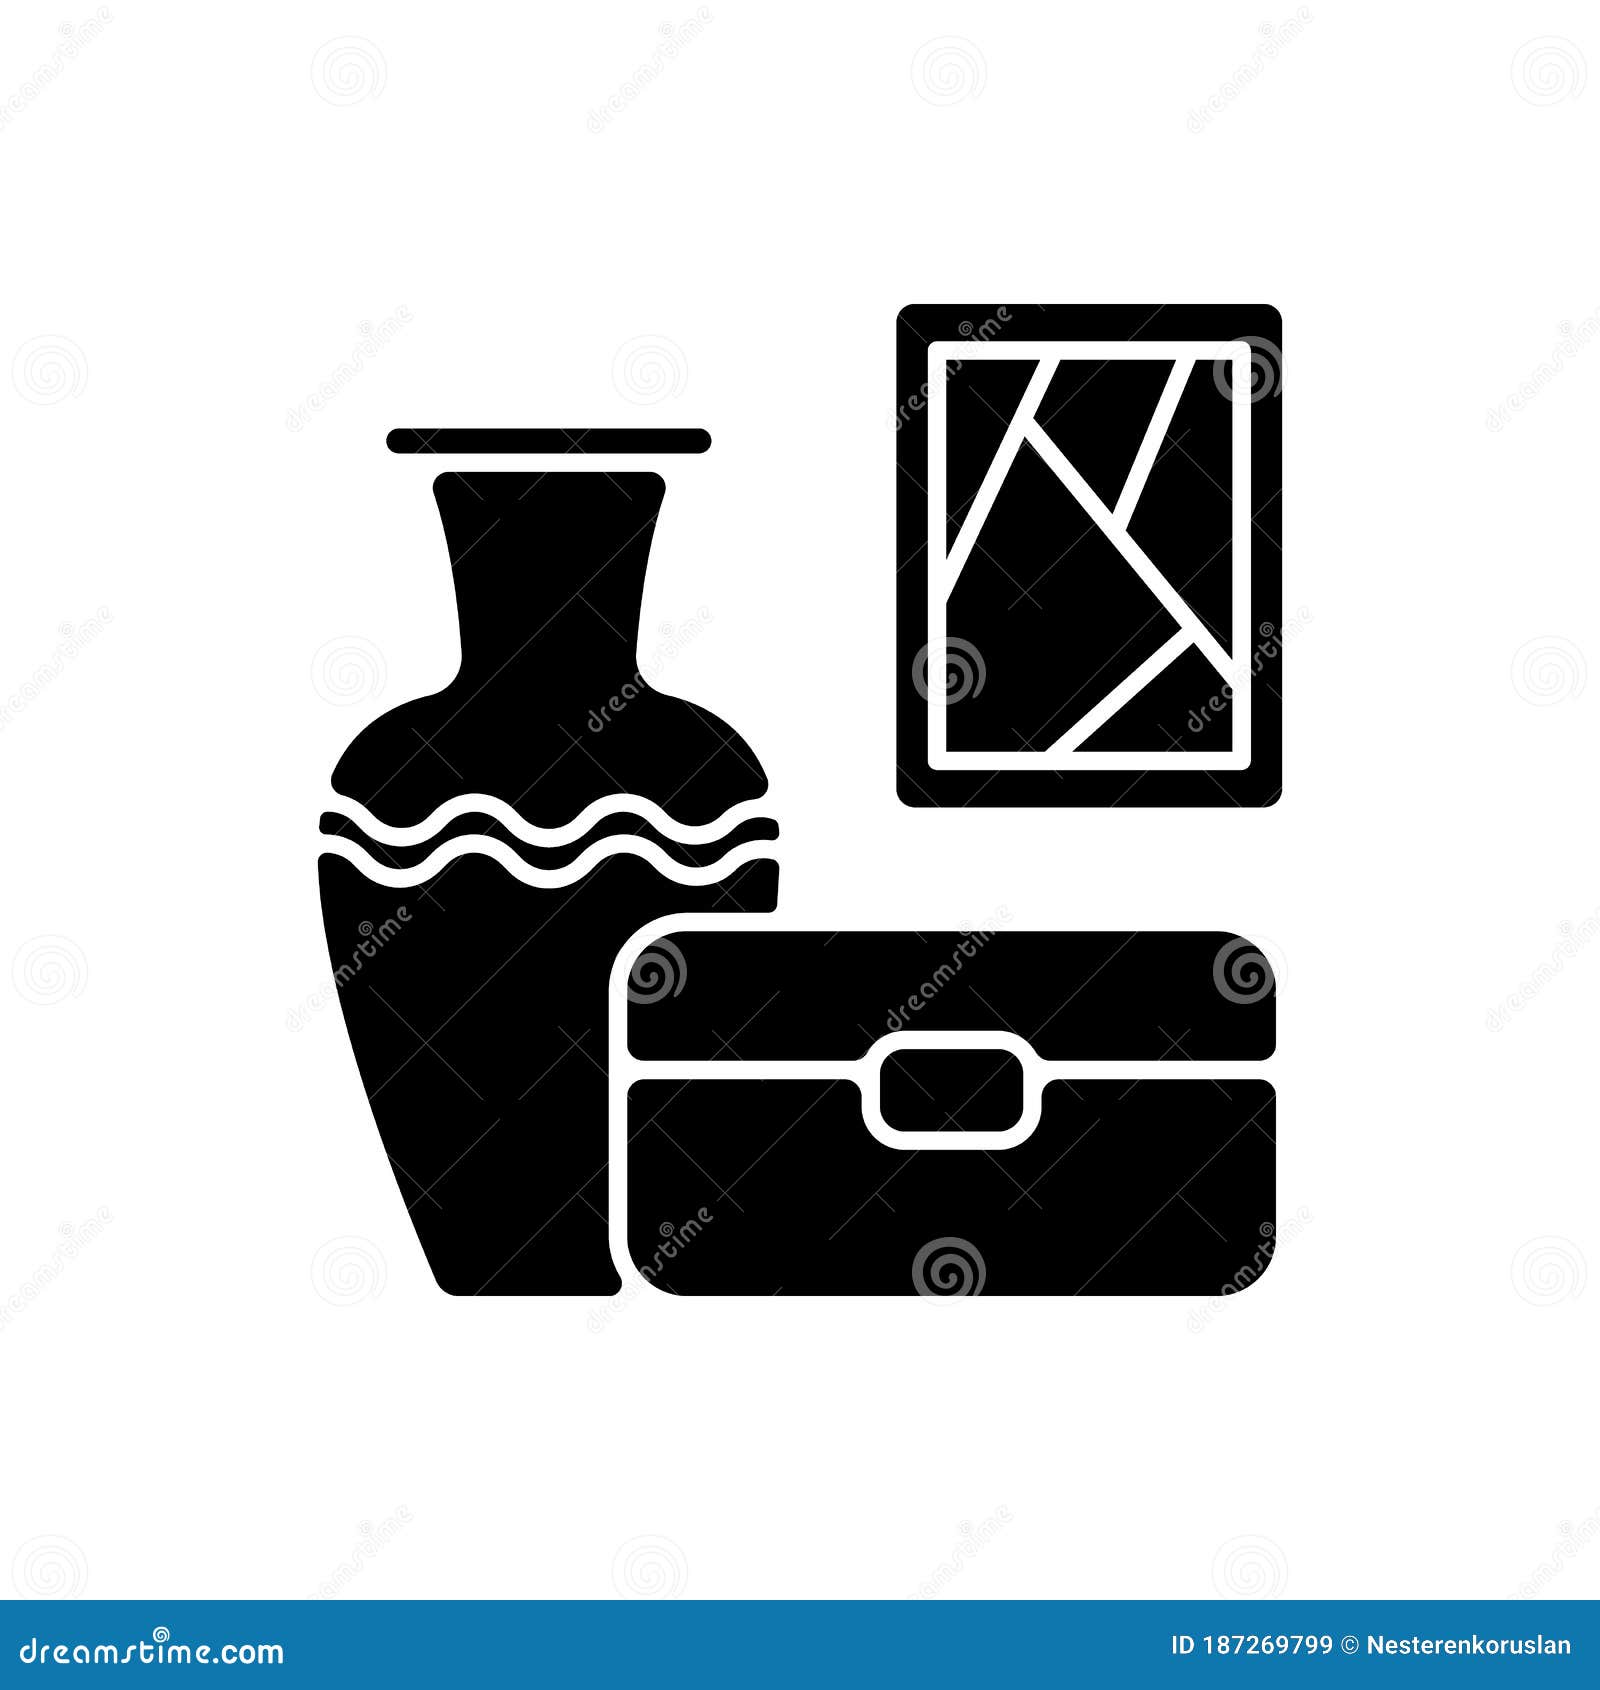 Unique household objects vector glyph icon set 23298699 Vector Art